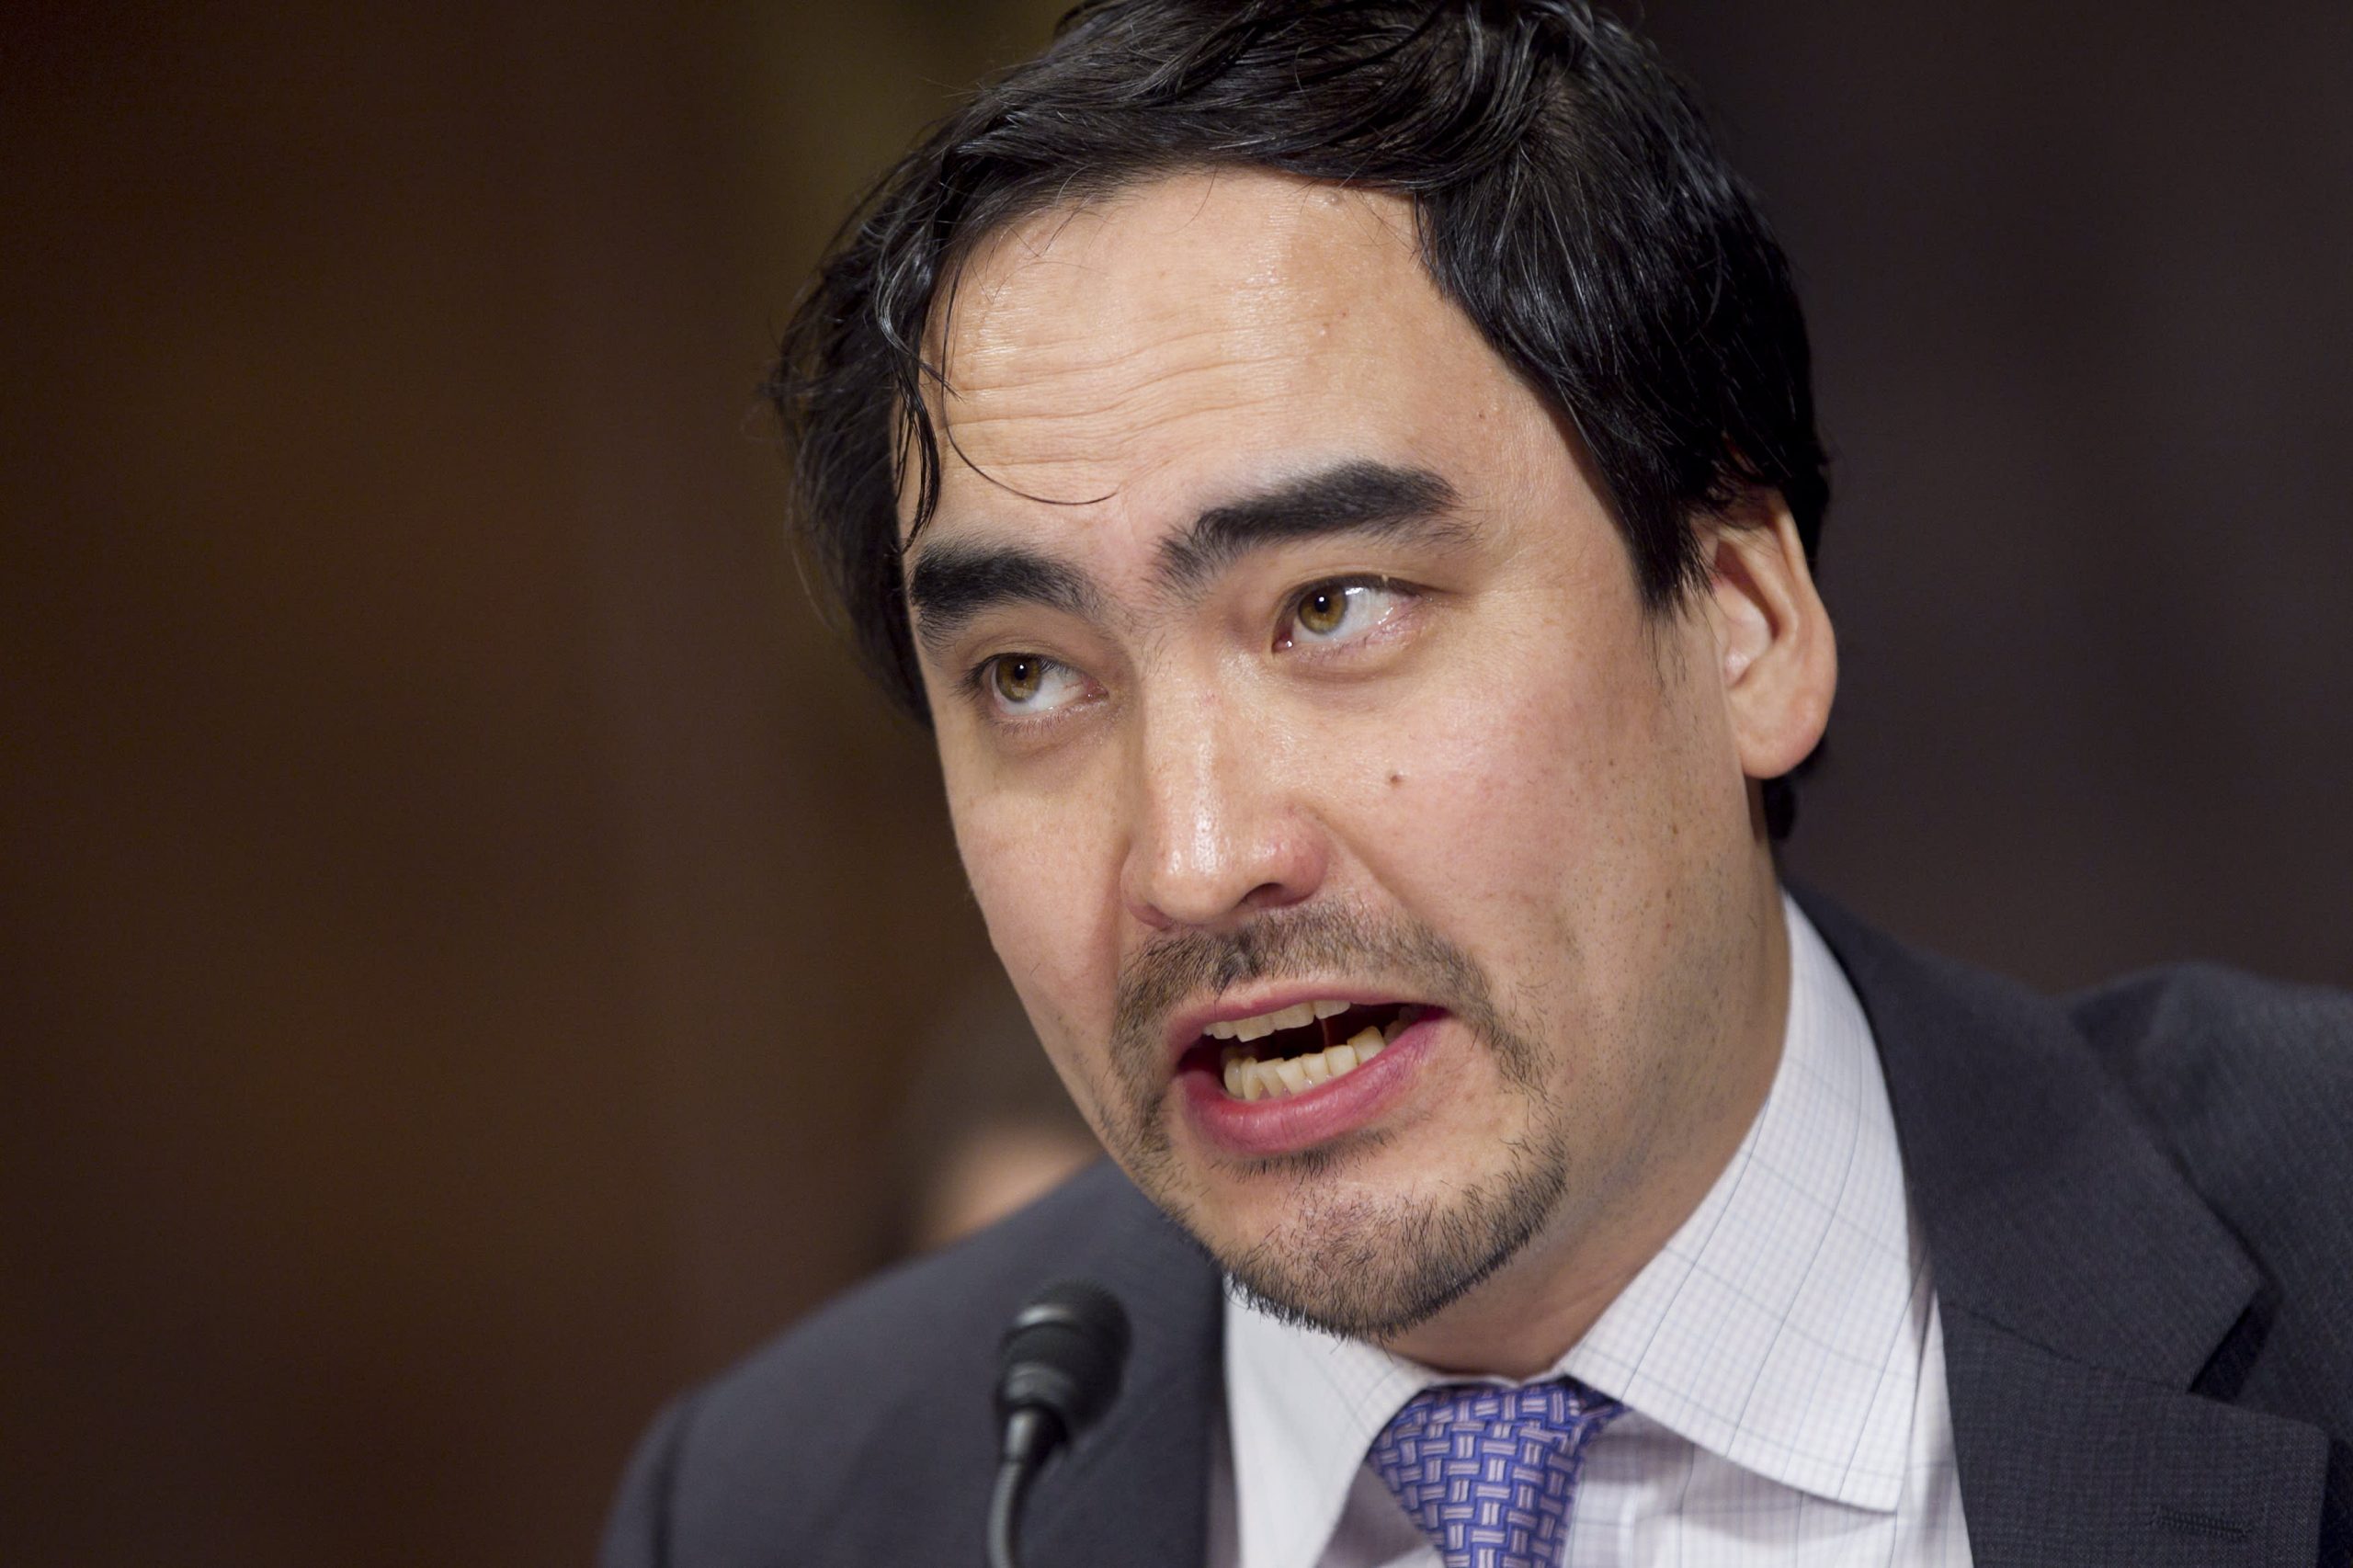 Big Tech critic Tim Wu joins Biden administration to work on competition policy